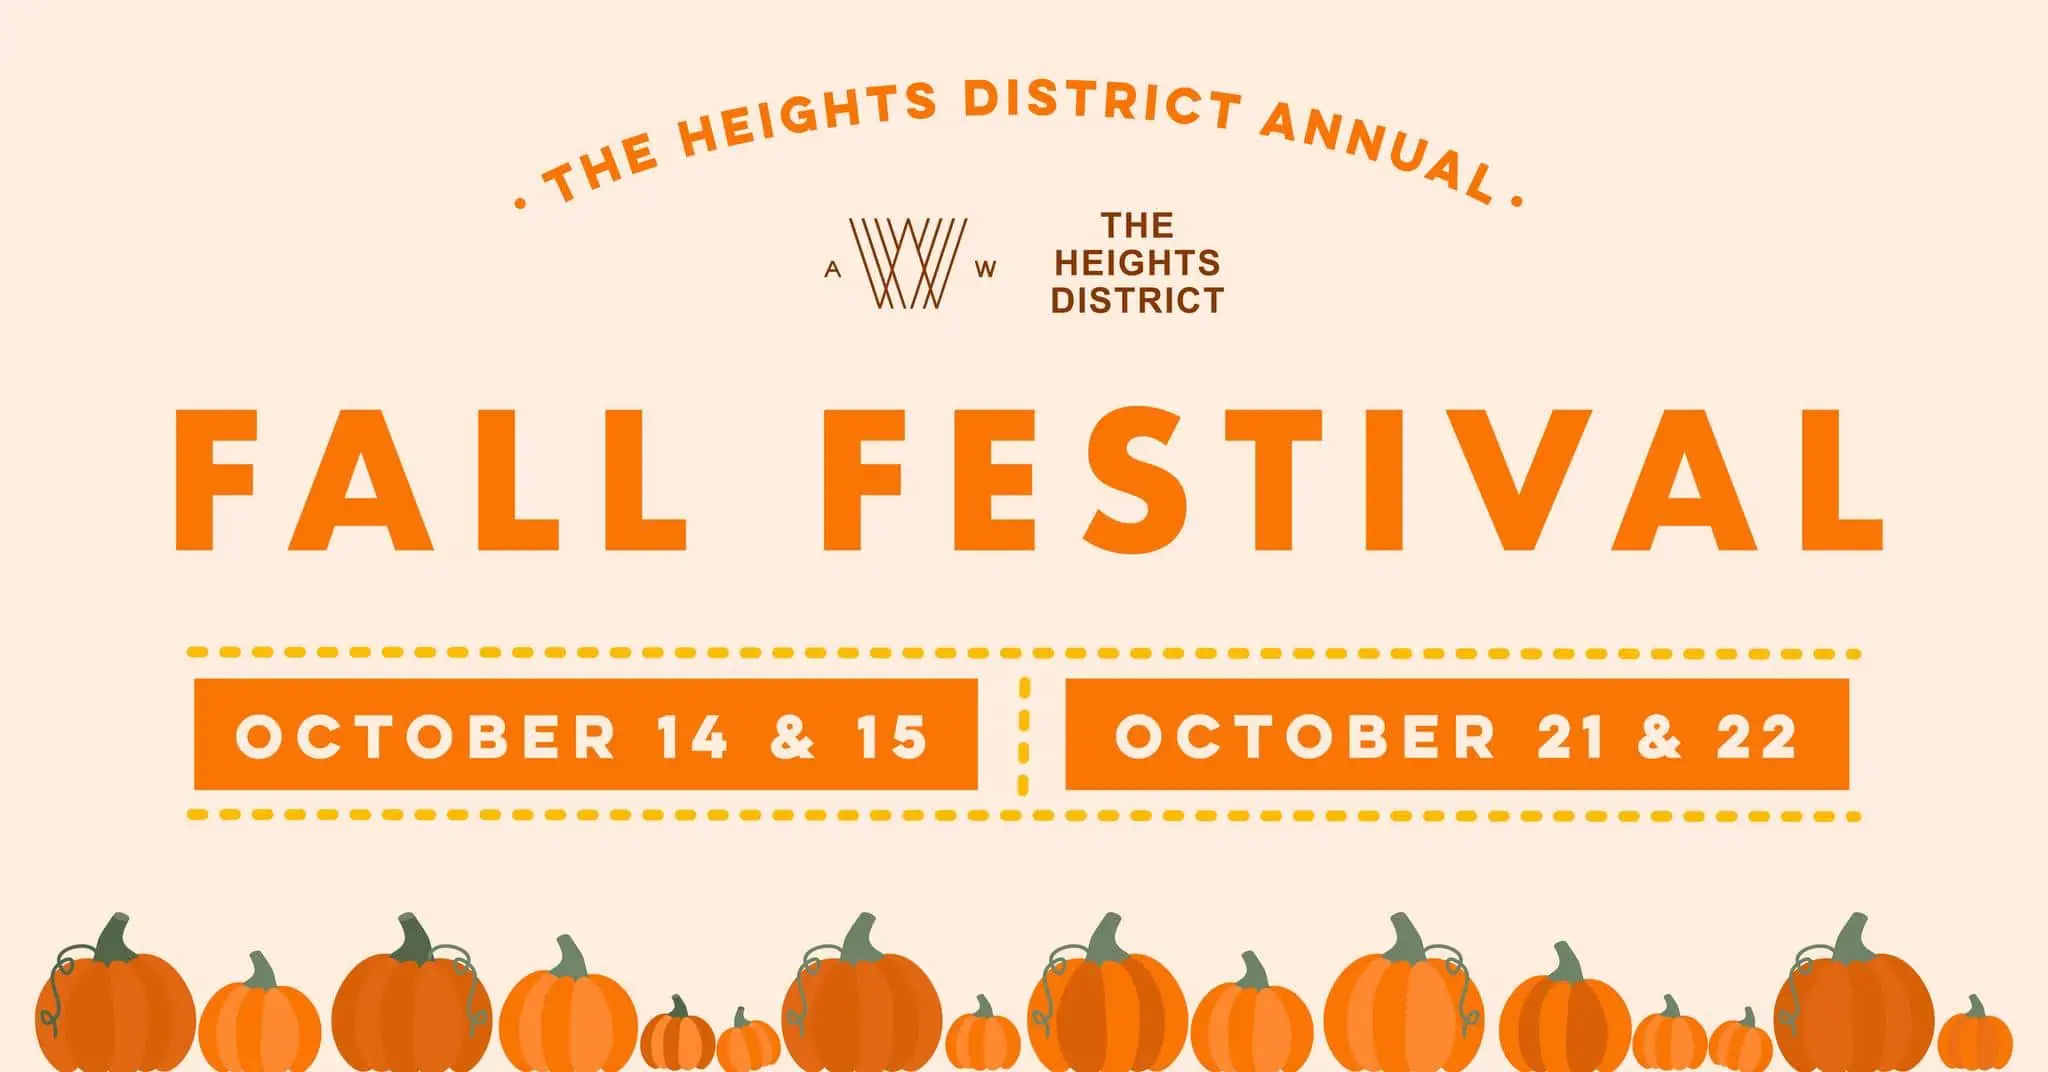 Heights District Fall Festival at Armature Works That's So Tampa